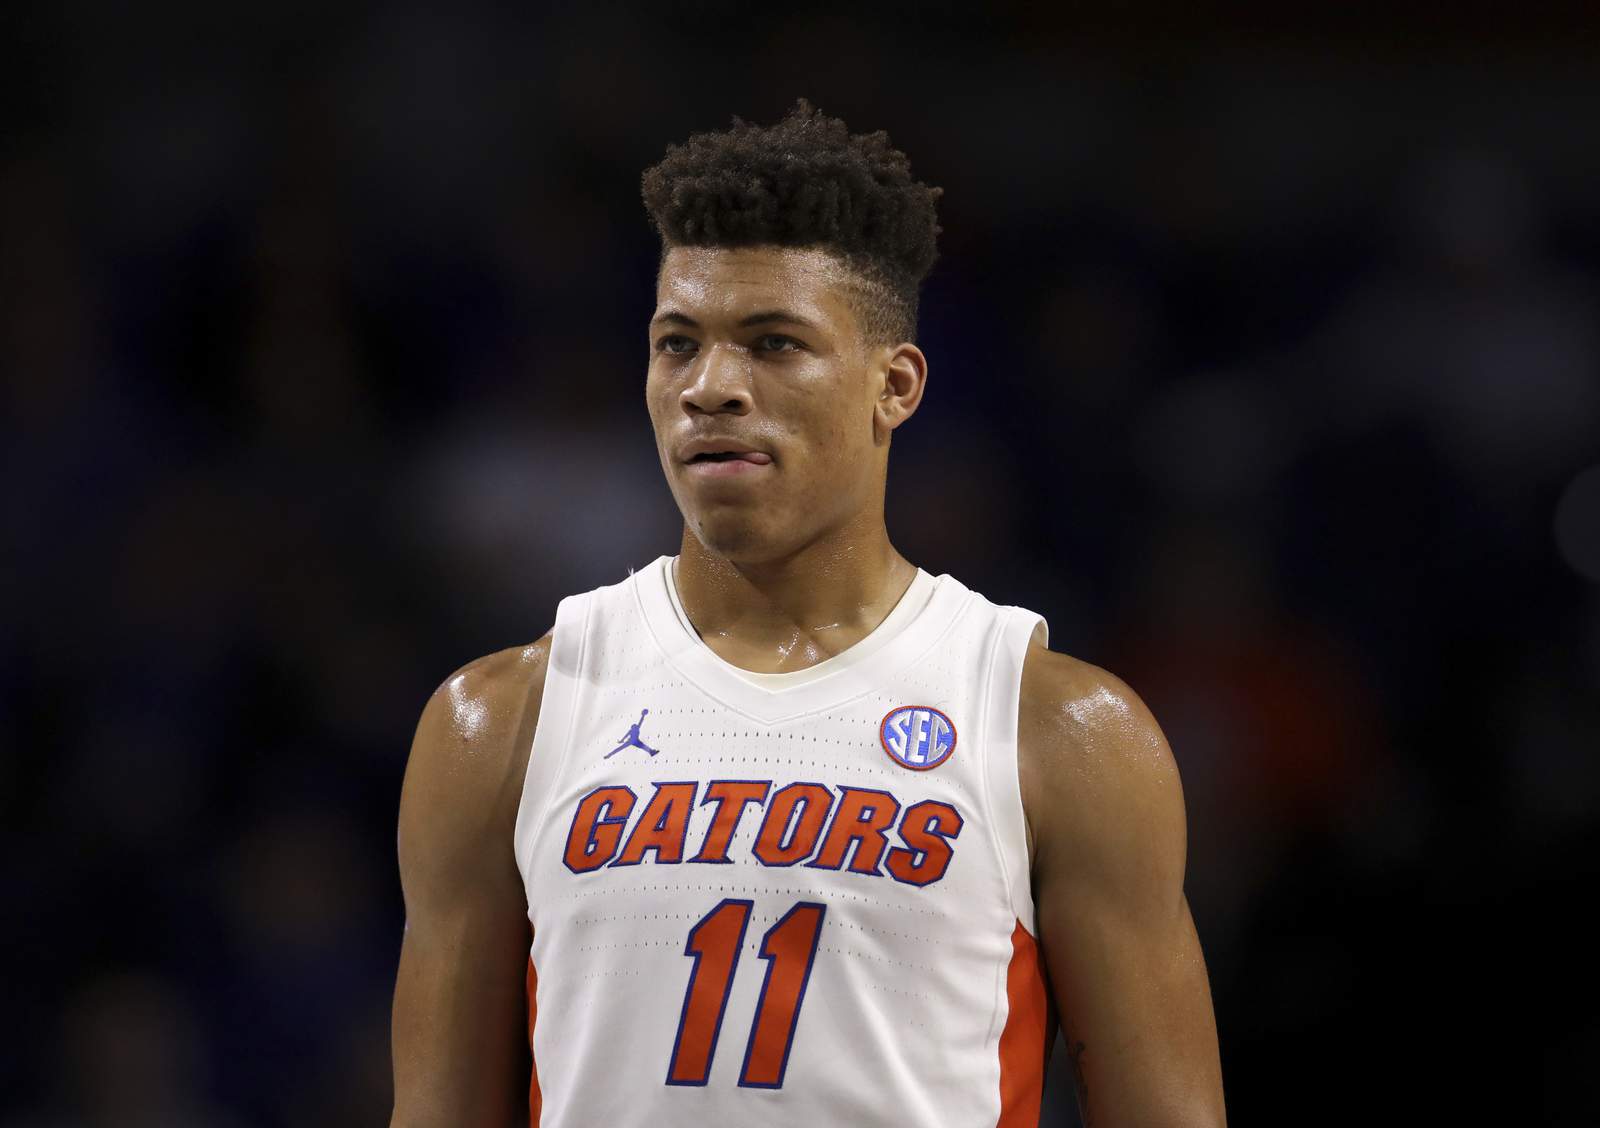 Florida's Johnson hospitalized after collapsing on court